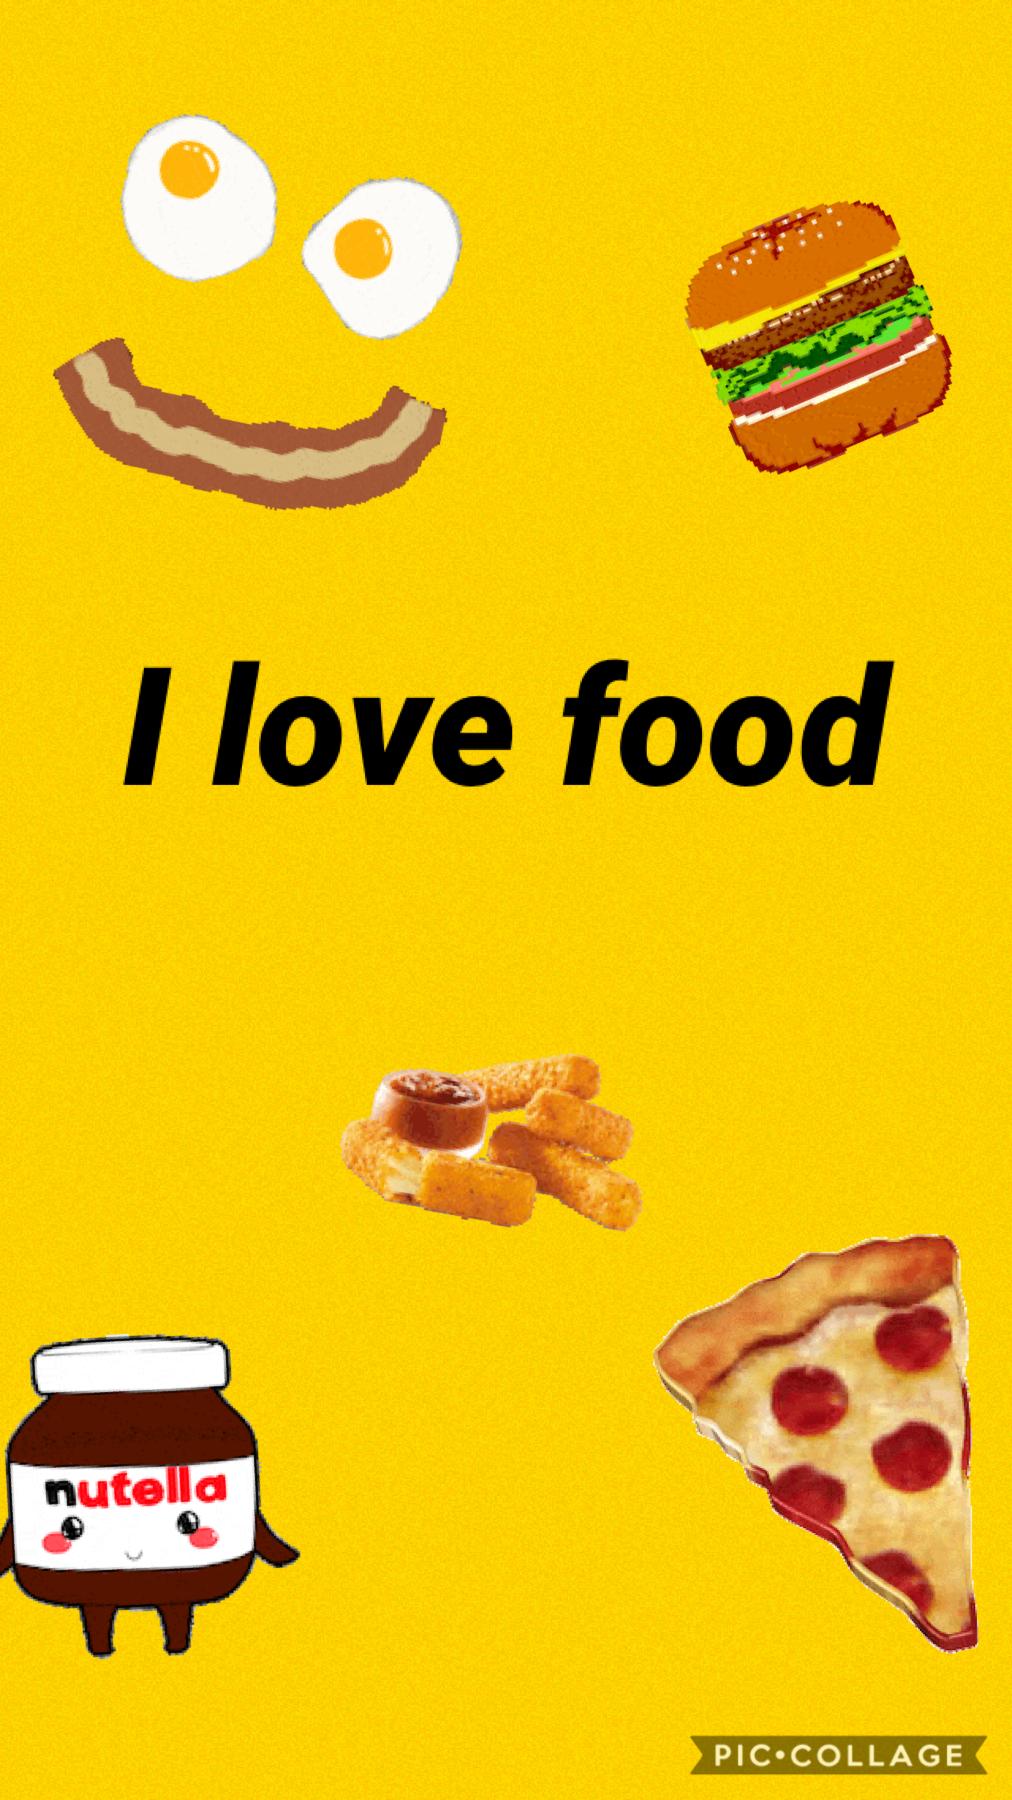                           🍌tap🍌

Who is so obsessed with food. I know that I am comment down below what your favorite food is! 🍴🍕🍔 🍌🍉